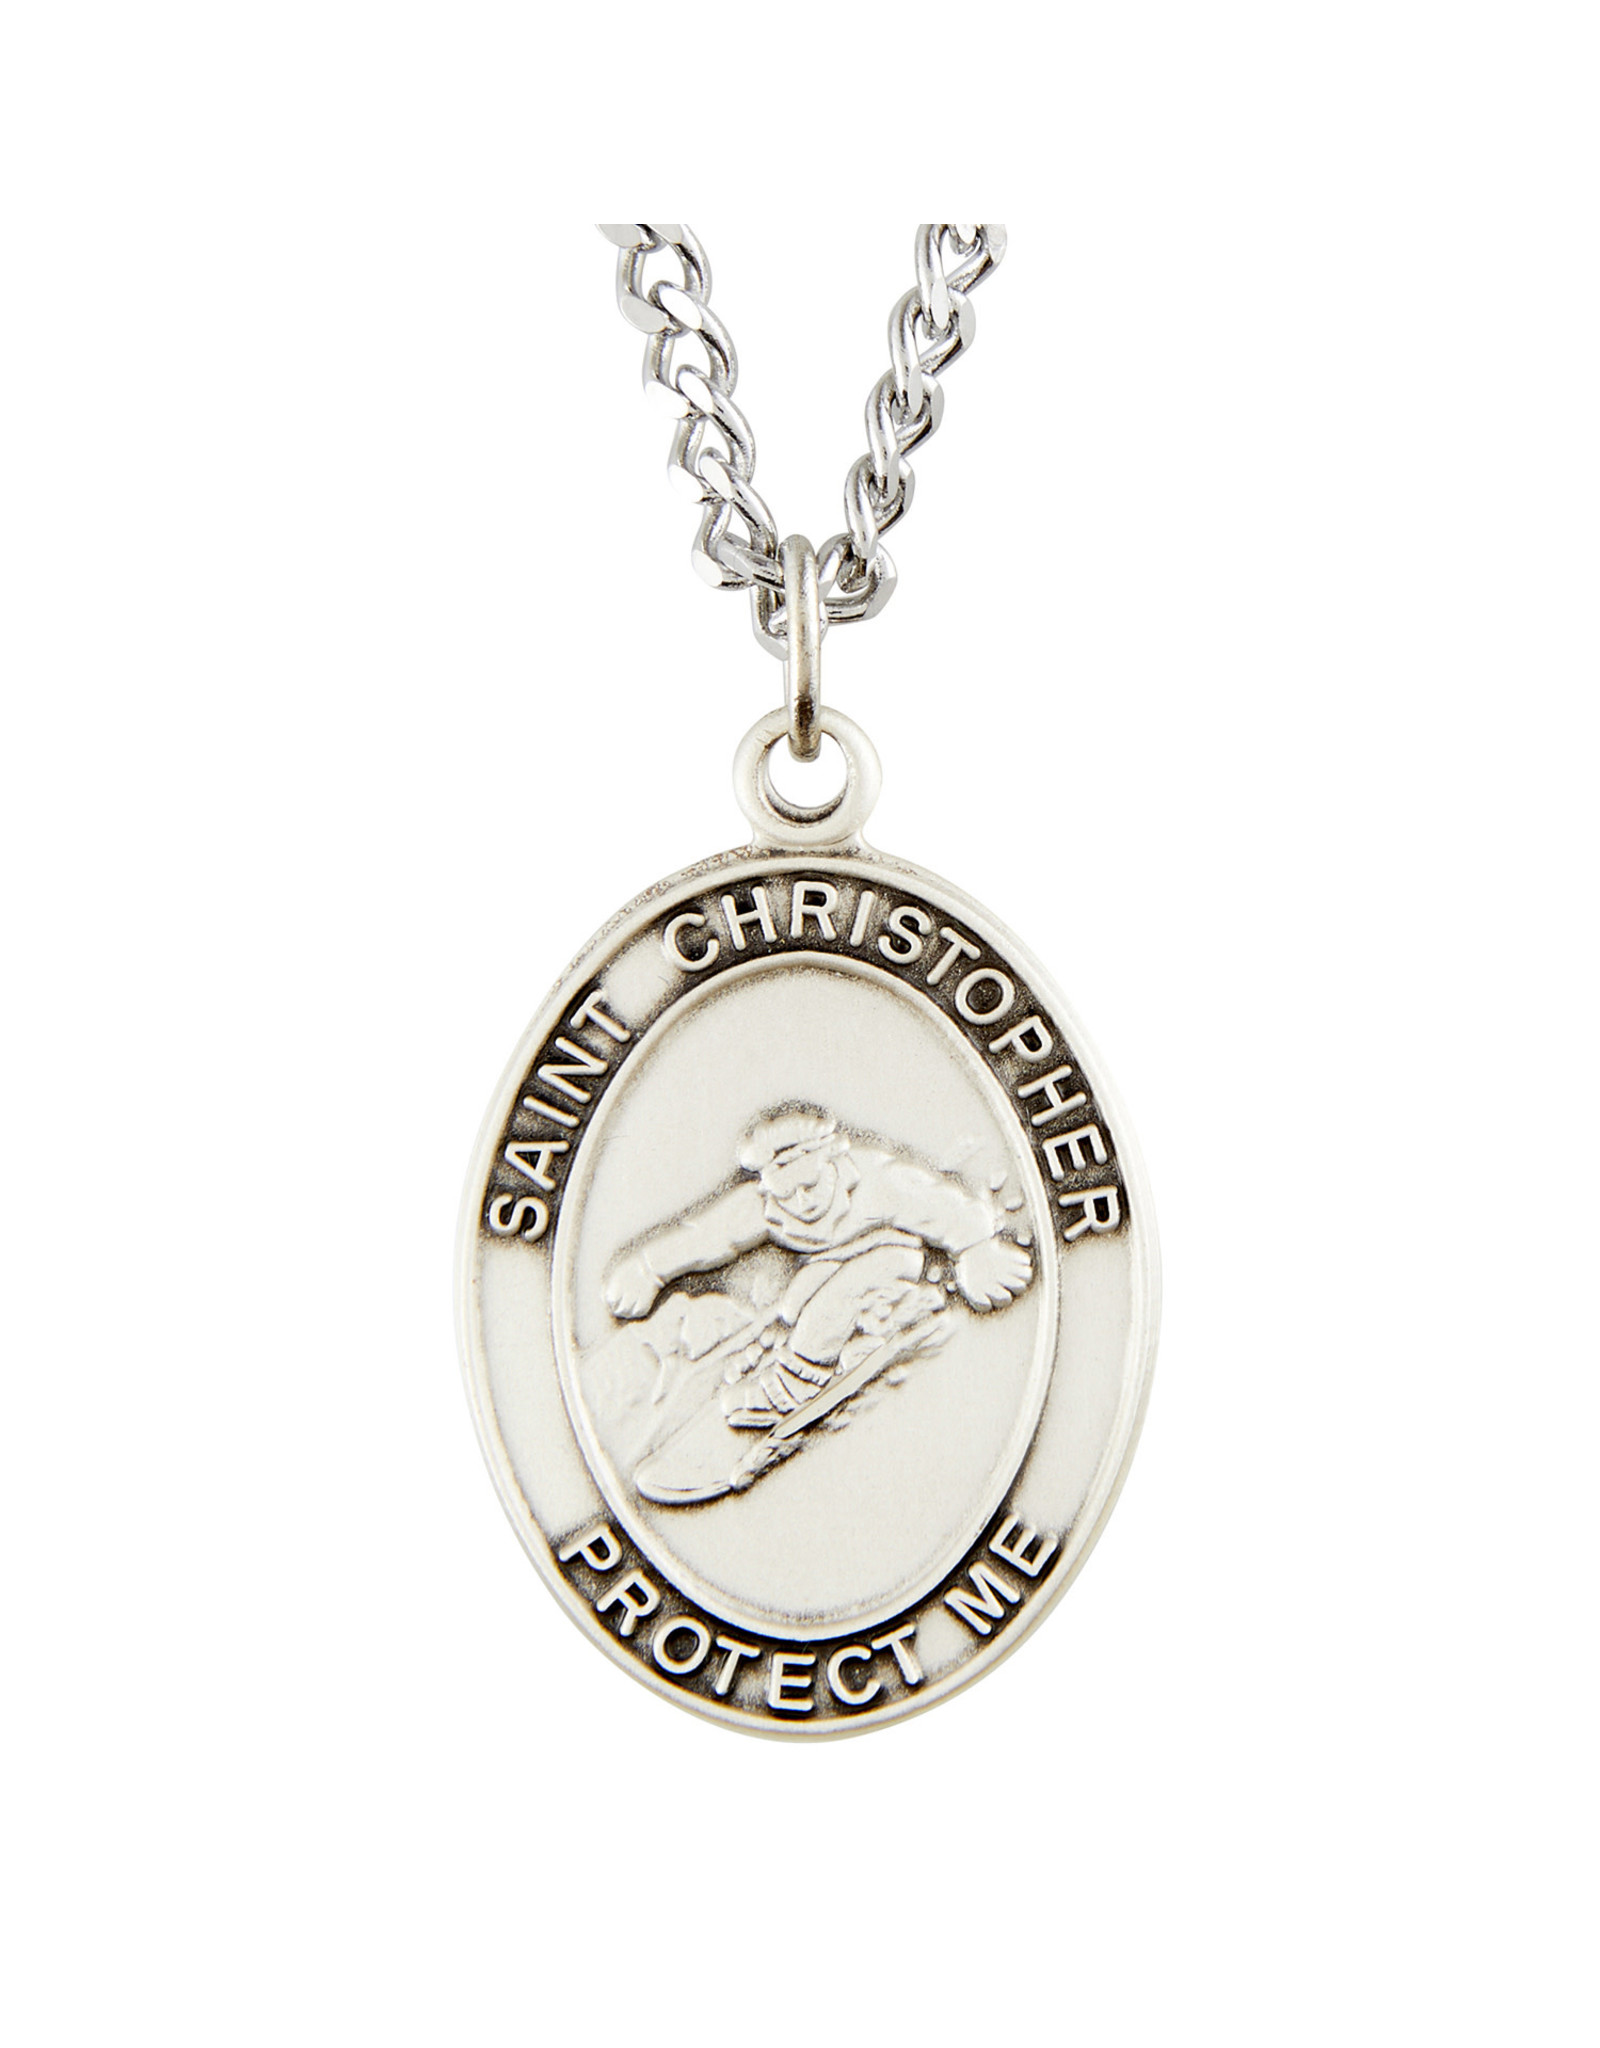 St. Christopher Sport Medal - Snowboarding - Sterling Silver - 24" Chain